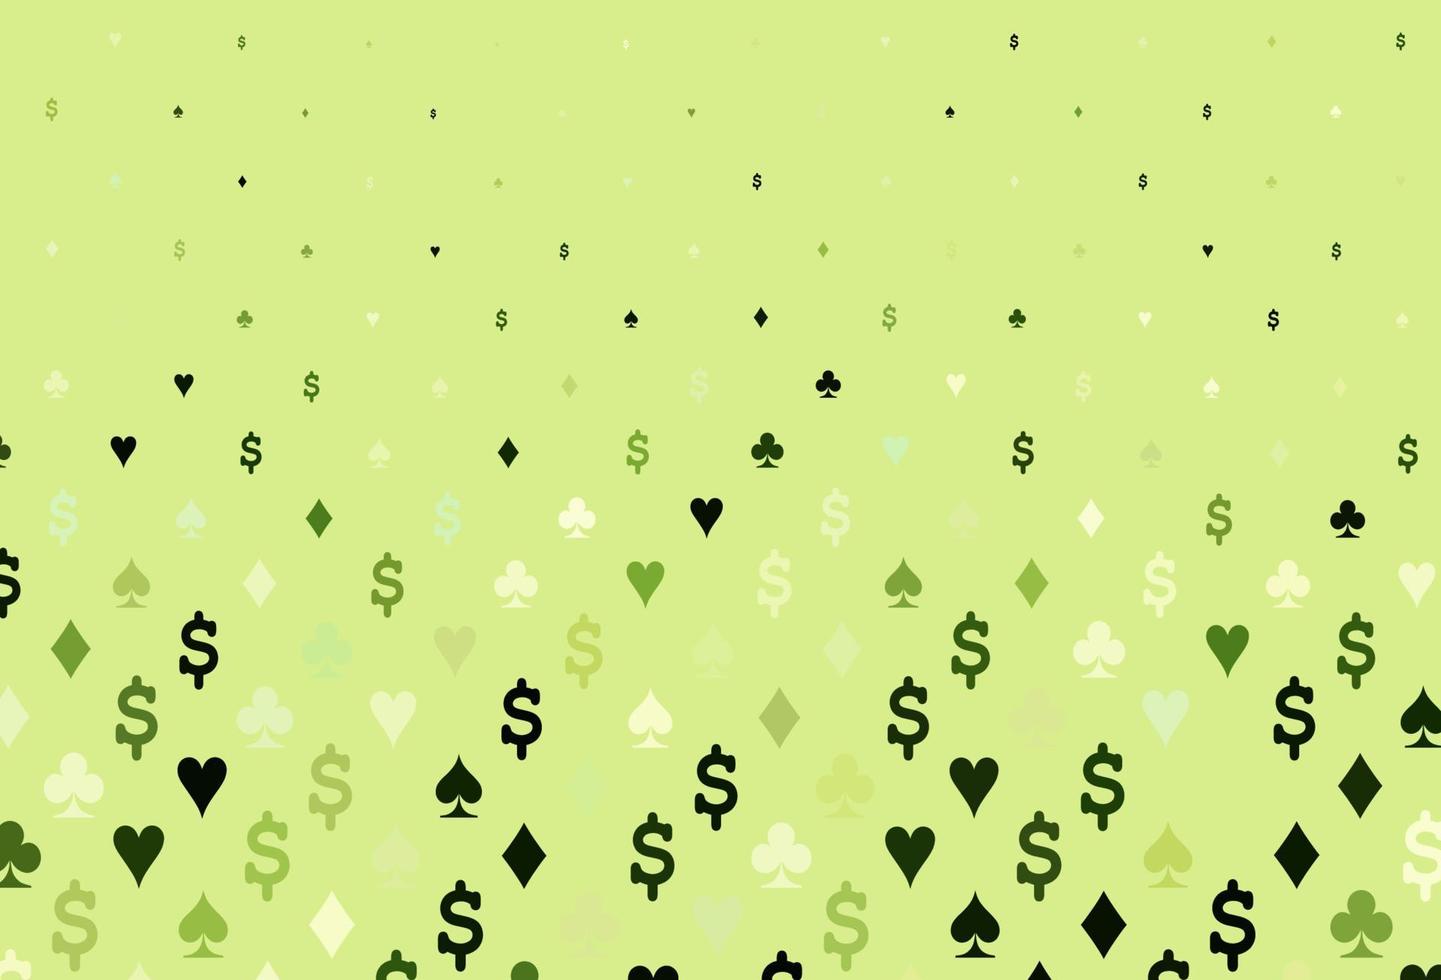 Dark green vector pattern with symbol of cards.